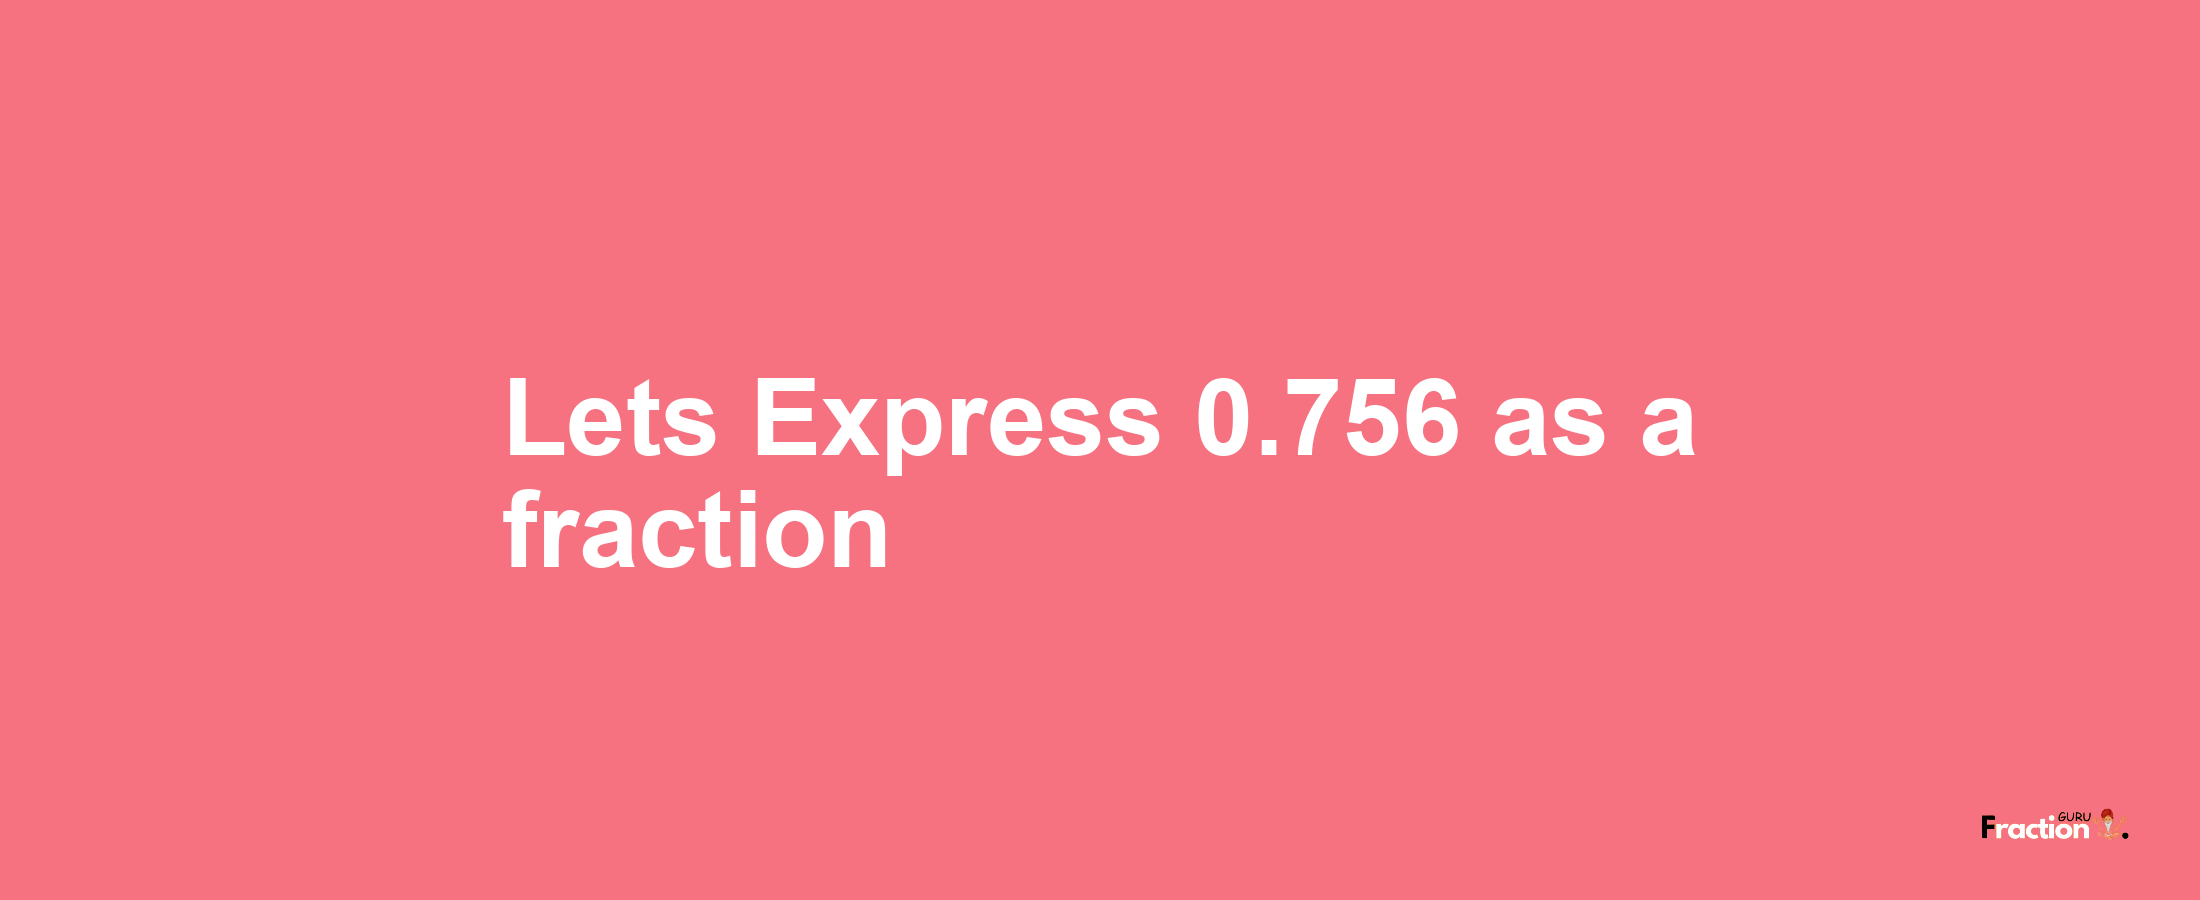 Lets Express 0.756 as afraction